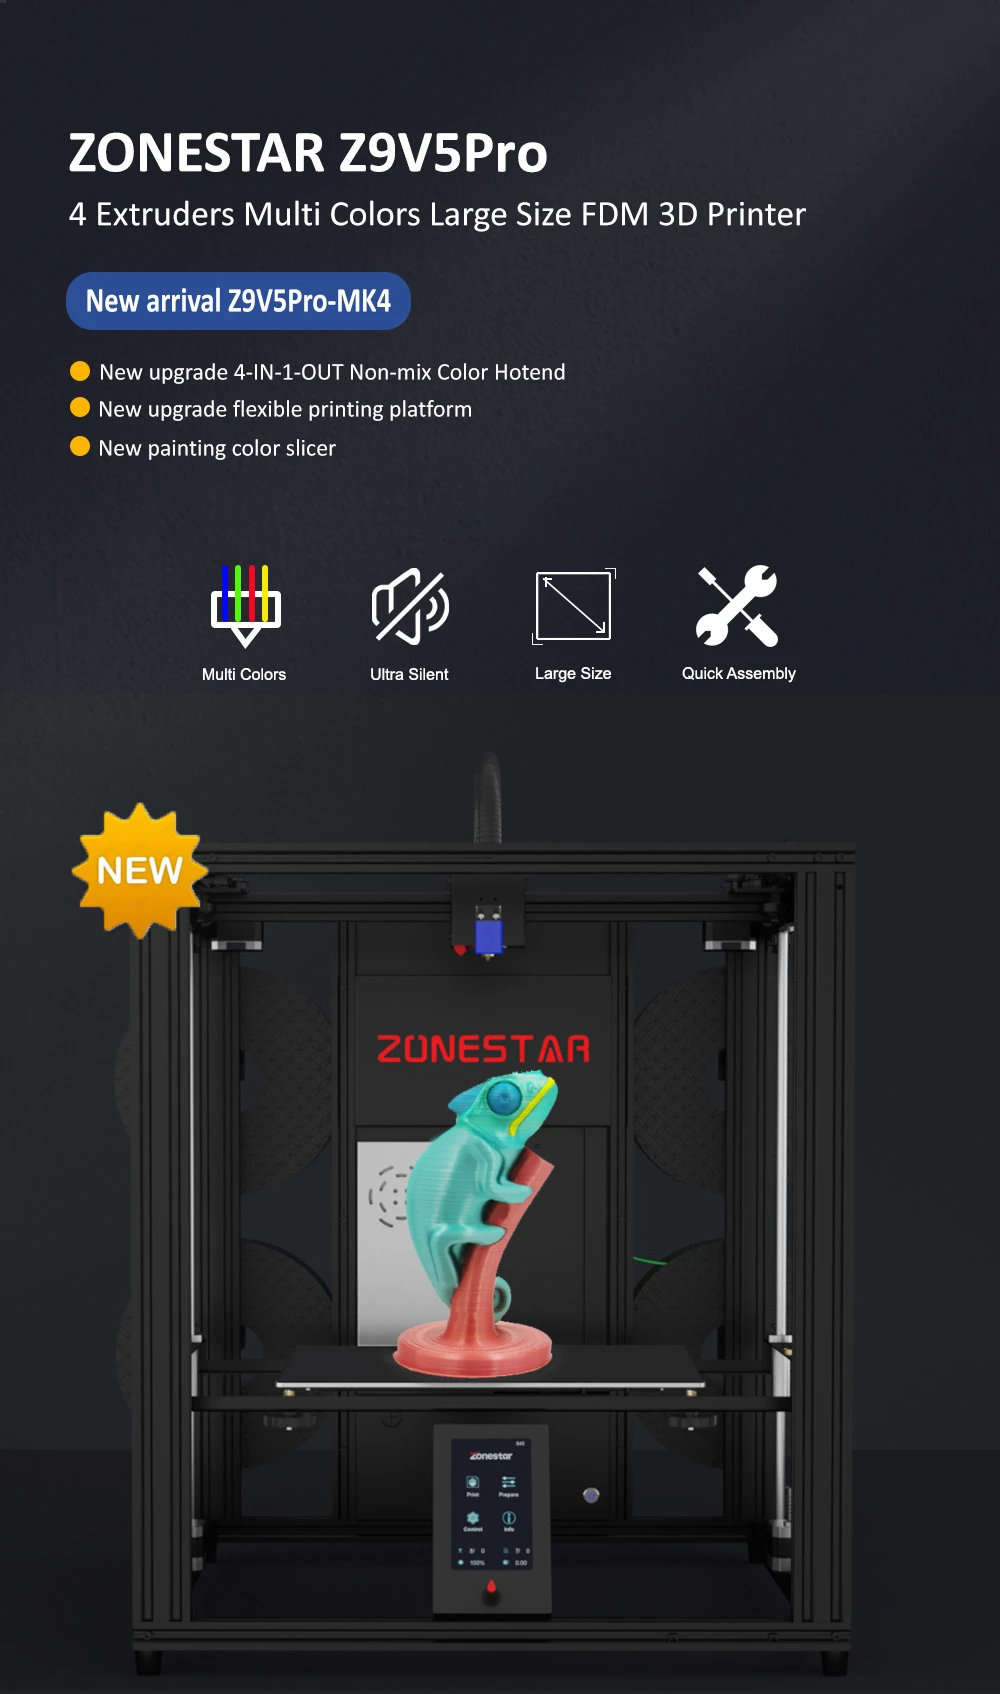 Zonestar Z9V5Pro MK4 4 Extruders 3D Printer, 4 Color Mixing, Auto Leveling, 32 Bit Control Board, Resume Printing, TFT-LCD, 300x300x400mm